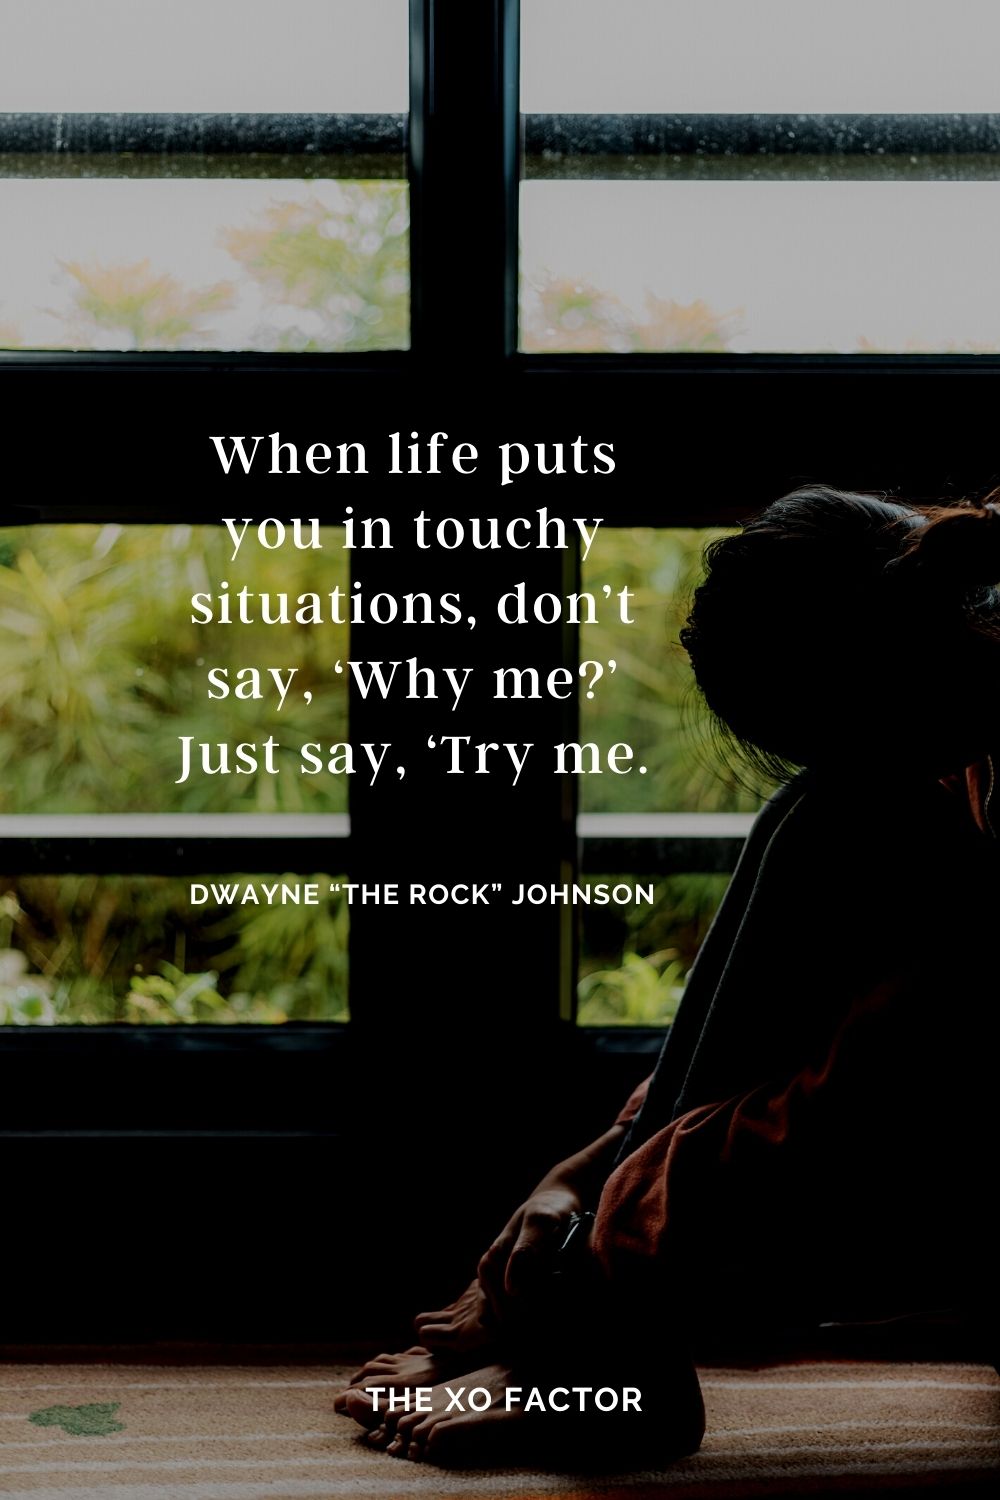 When life puts you in touchy situations, don’t say, ‘Why me?’ Just say, ‘Try me. Dwayne “The Rock” Johnson